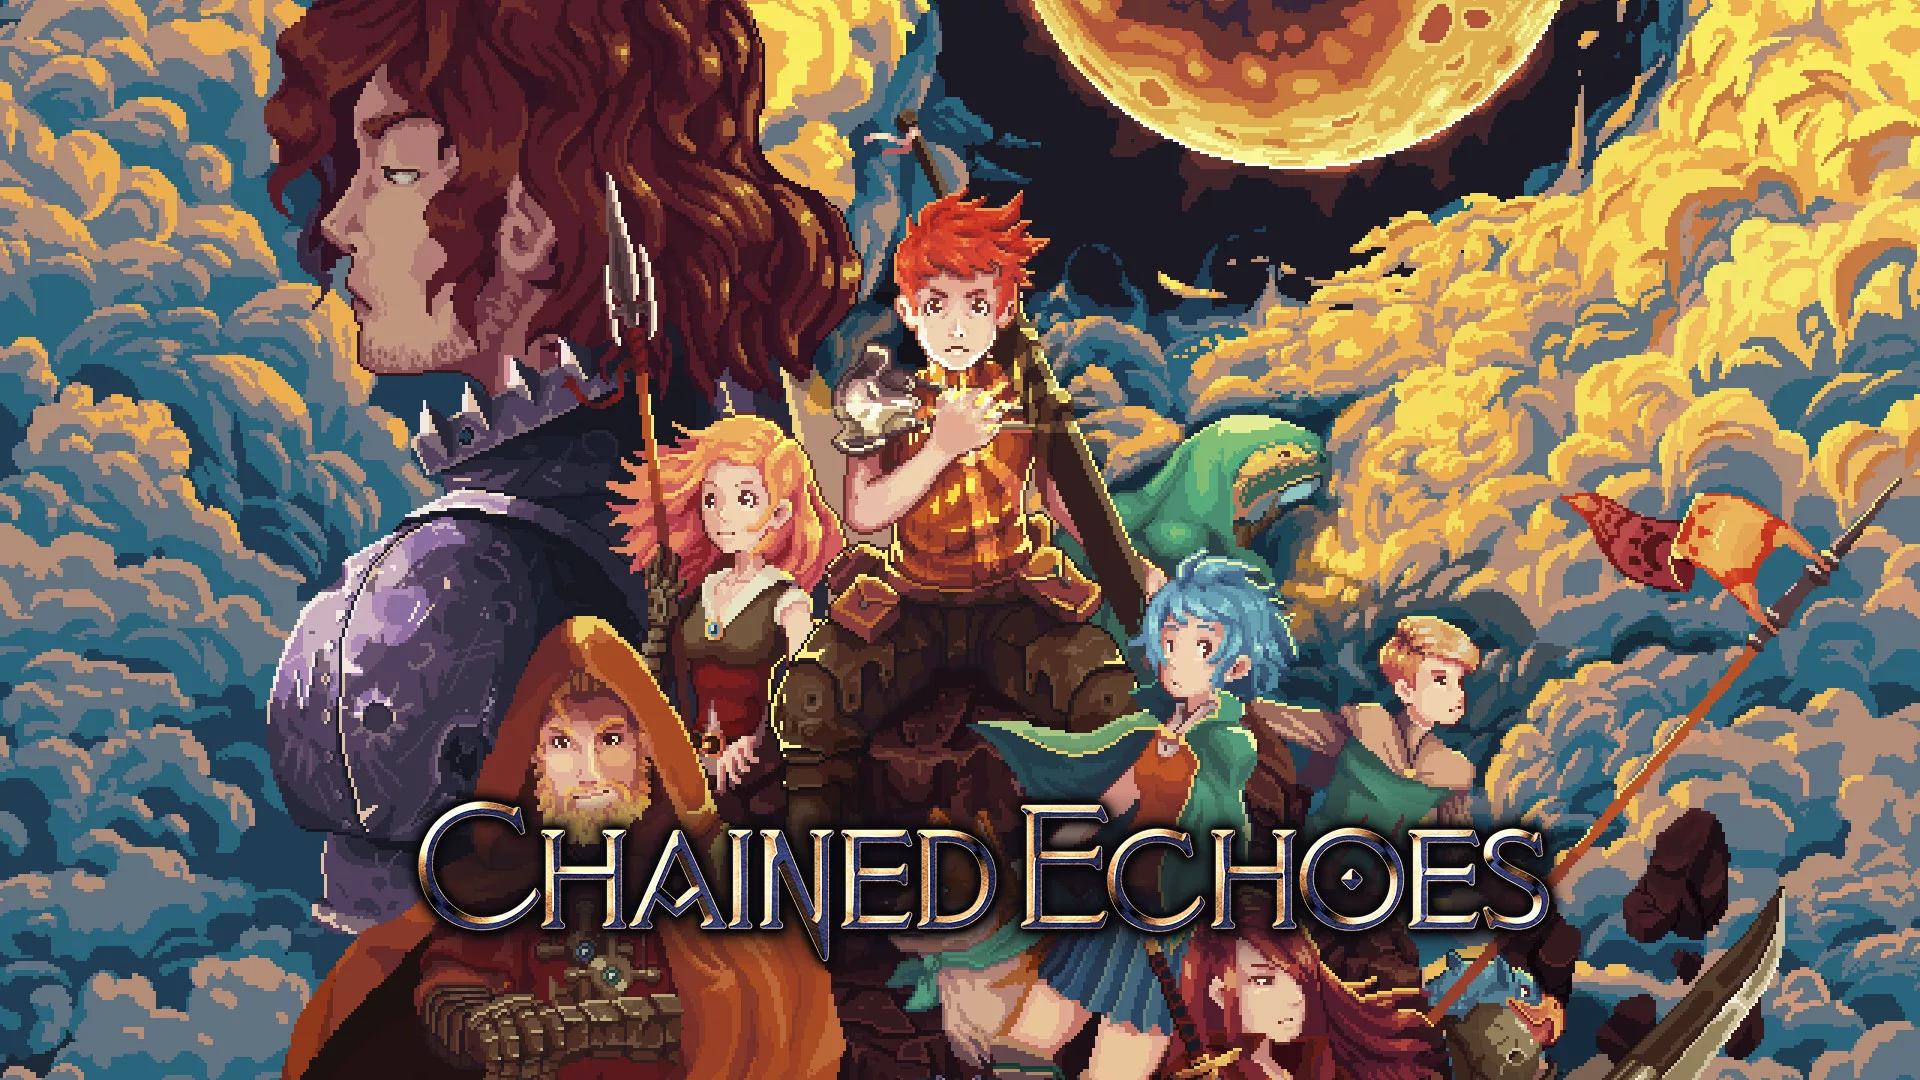 Chained Echoes launch trailer